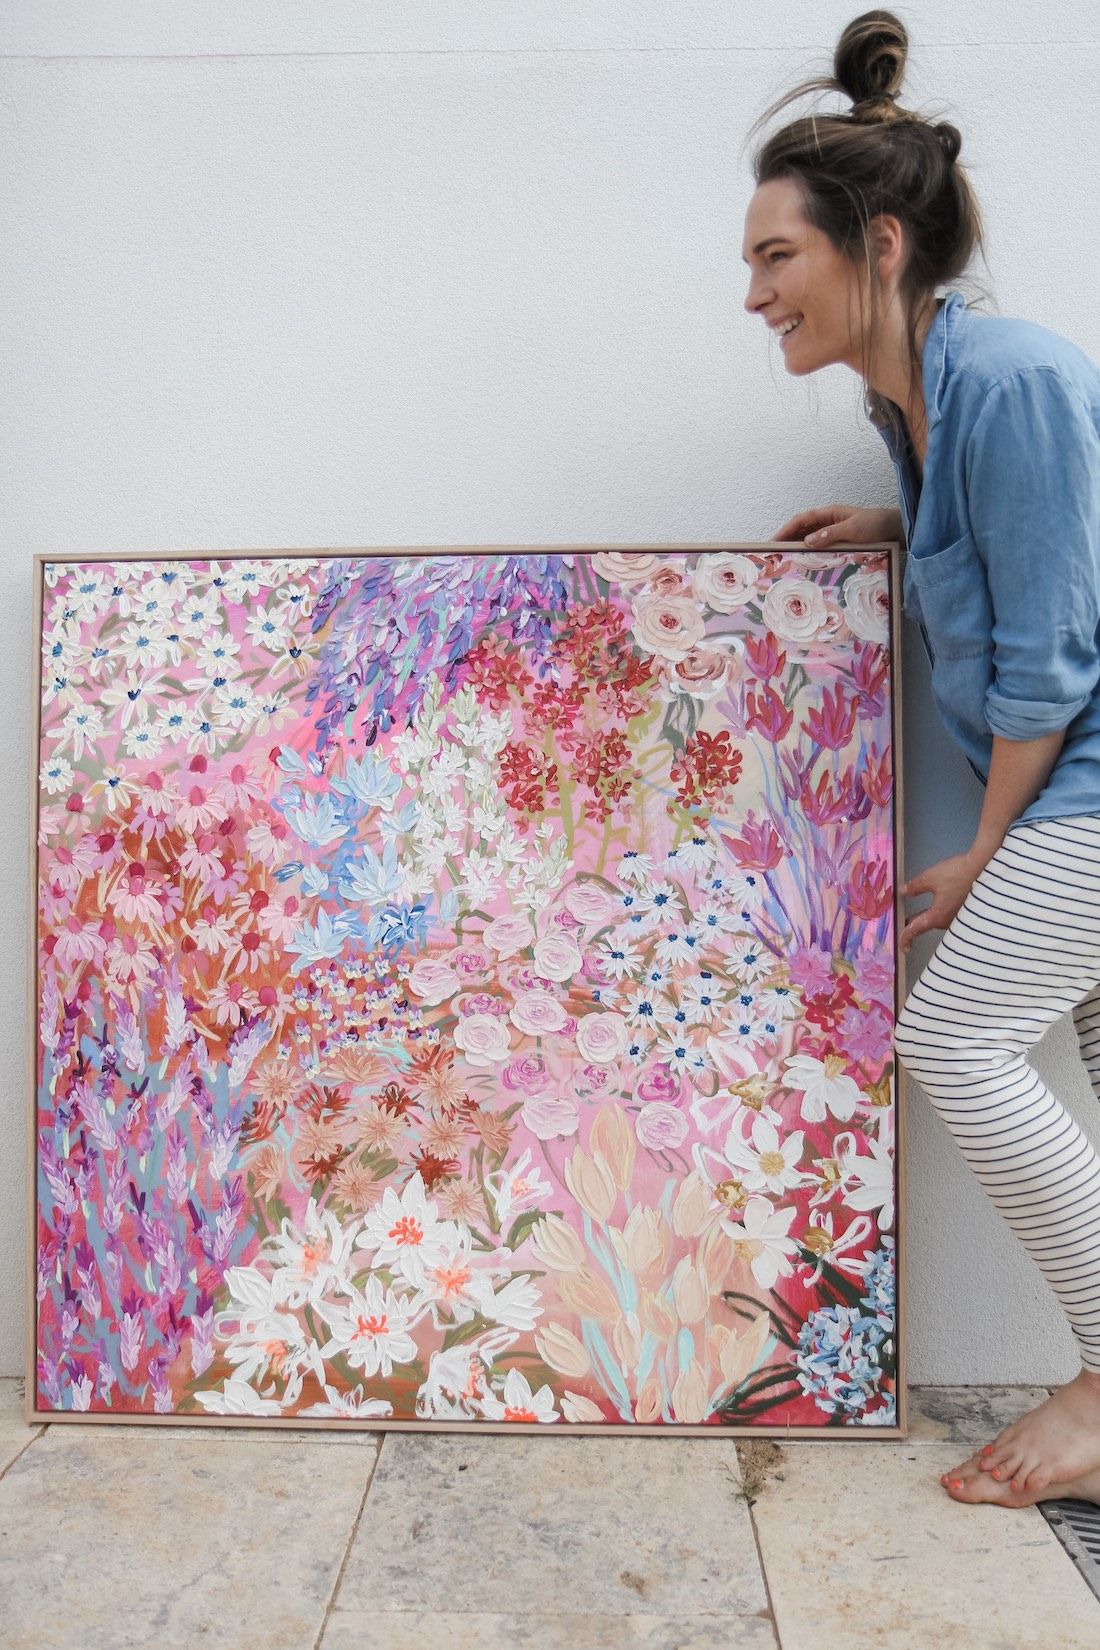 The colour and textured artworks from Kelsie Rose Creative | Style Curator